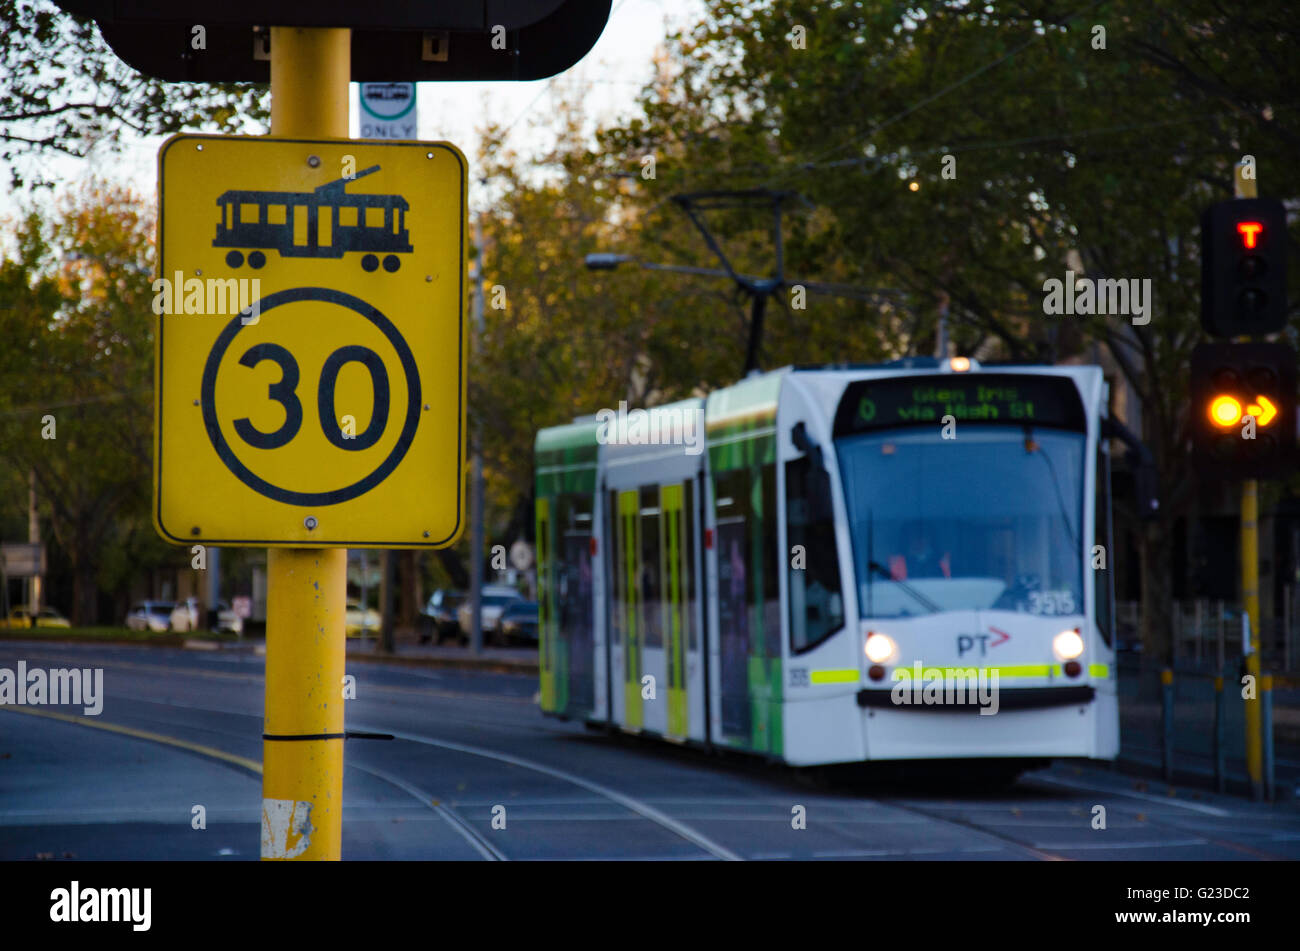 A Tram in South Yarra in the city of Melbourne, Australia Stock Photo